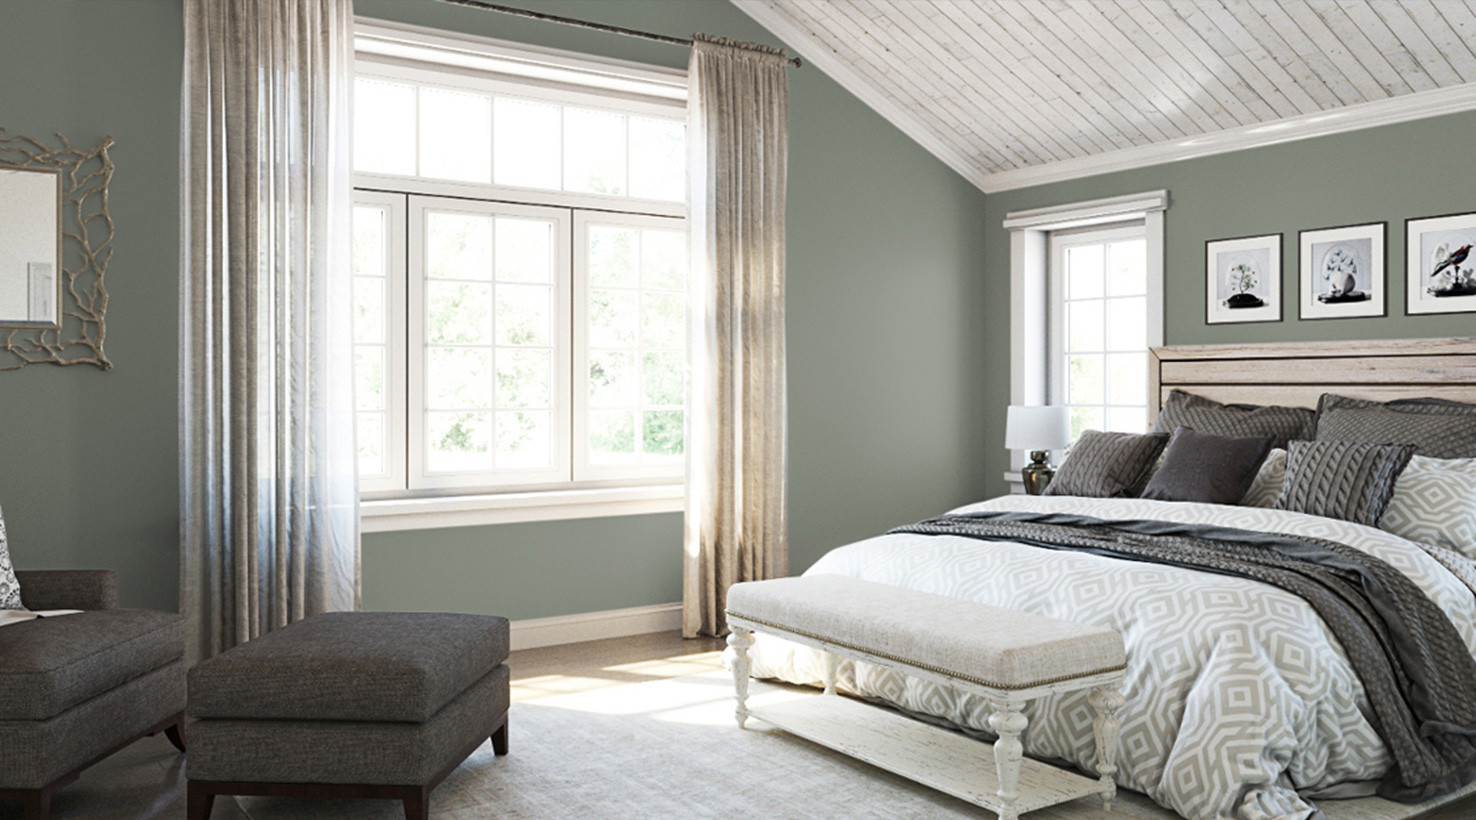 Popular Colors For Bedroom
 Bedroom Paint Color Ideas Inspiration Gallery